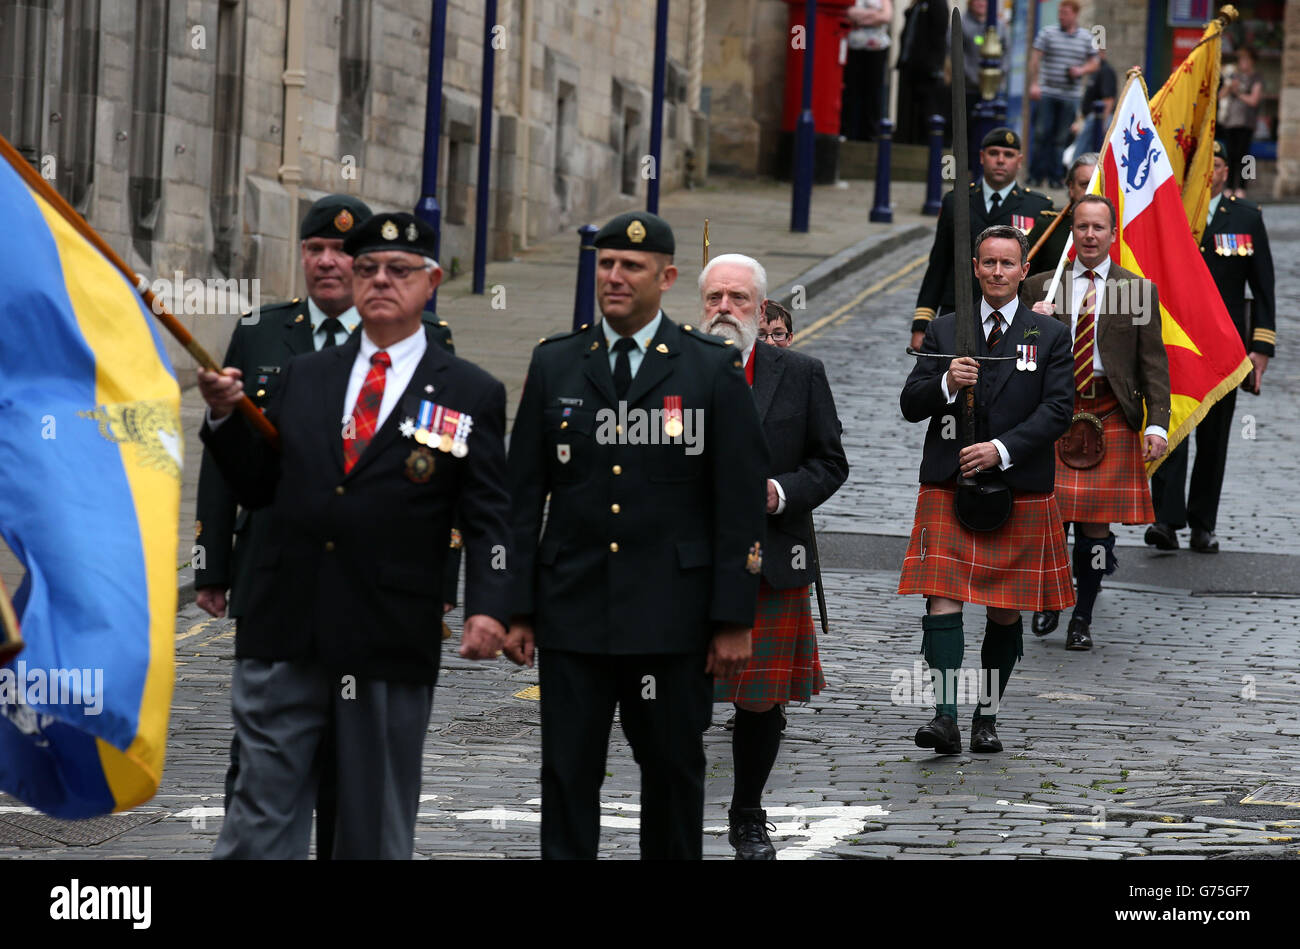 Lord Bruce DL (right), bearing the Sword of King Robert I of Scots arrives for a service to commemorate the victory of King Robert the Bruce at Bannockburn held in the Abbey Church in Dunfermline, Scotland. Stock Photo